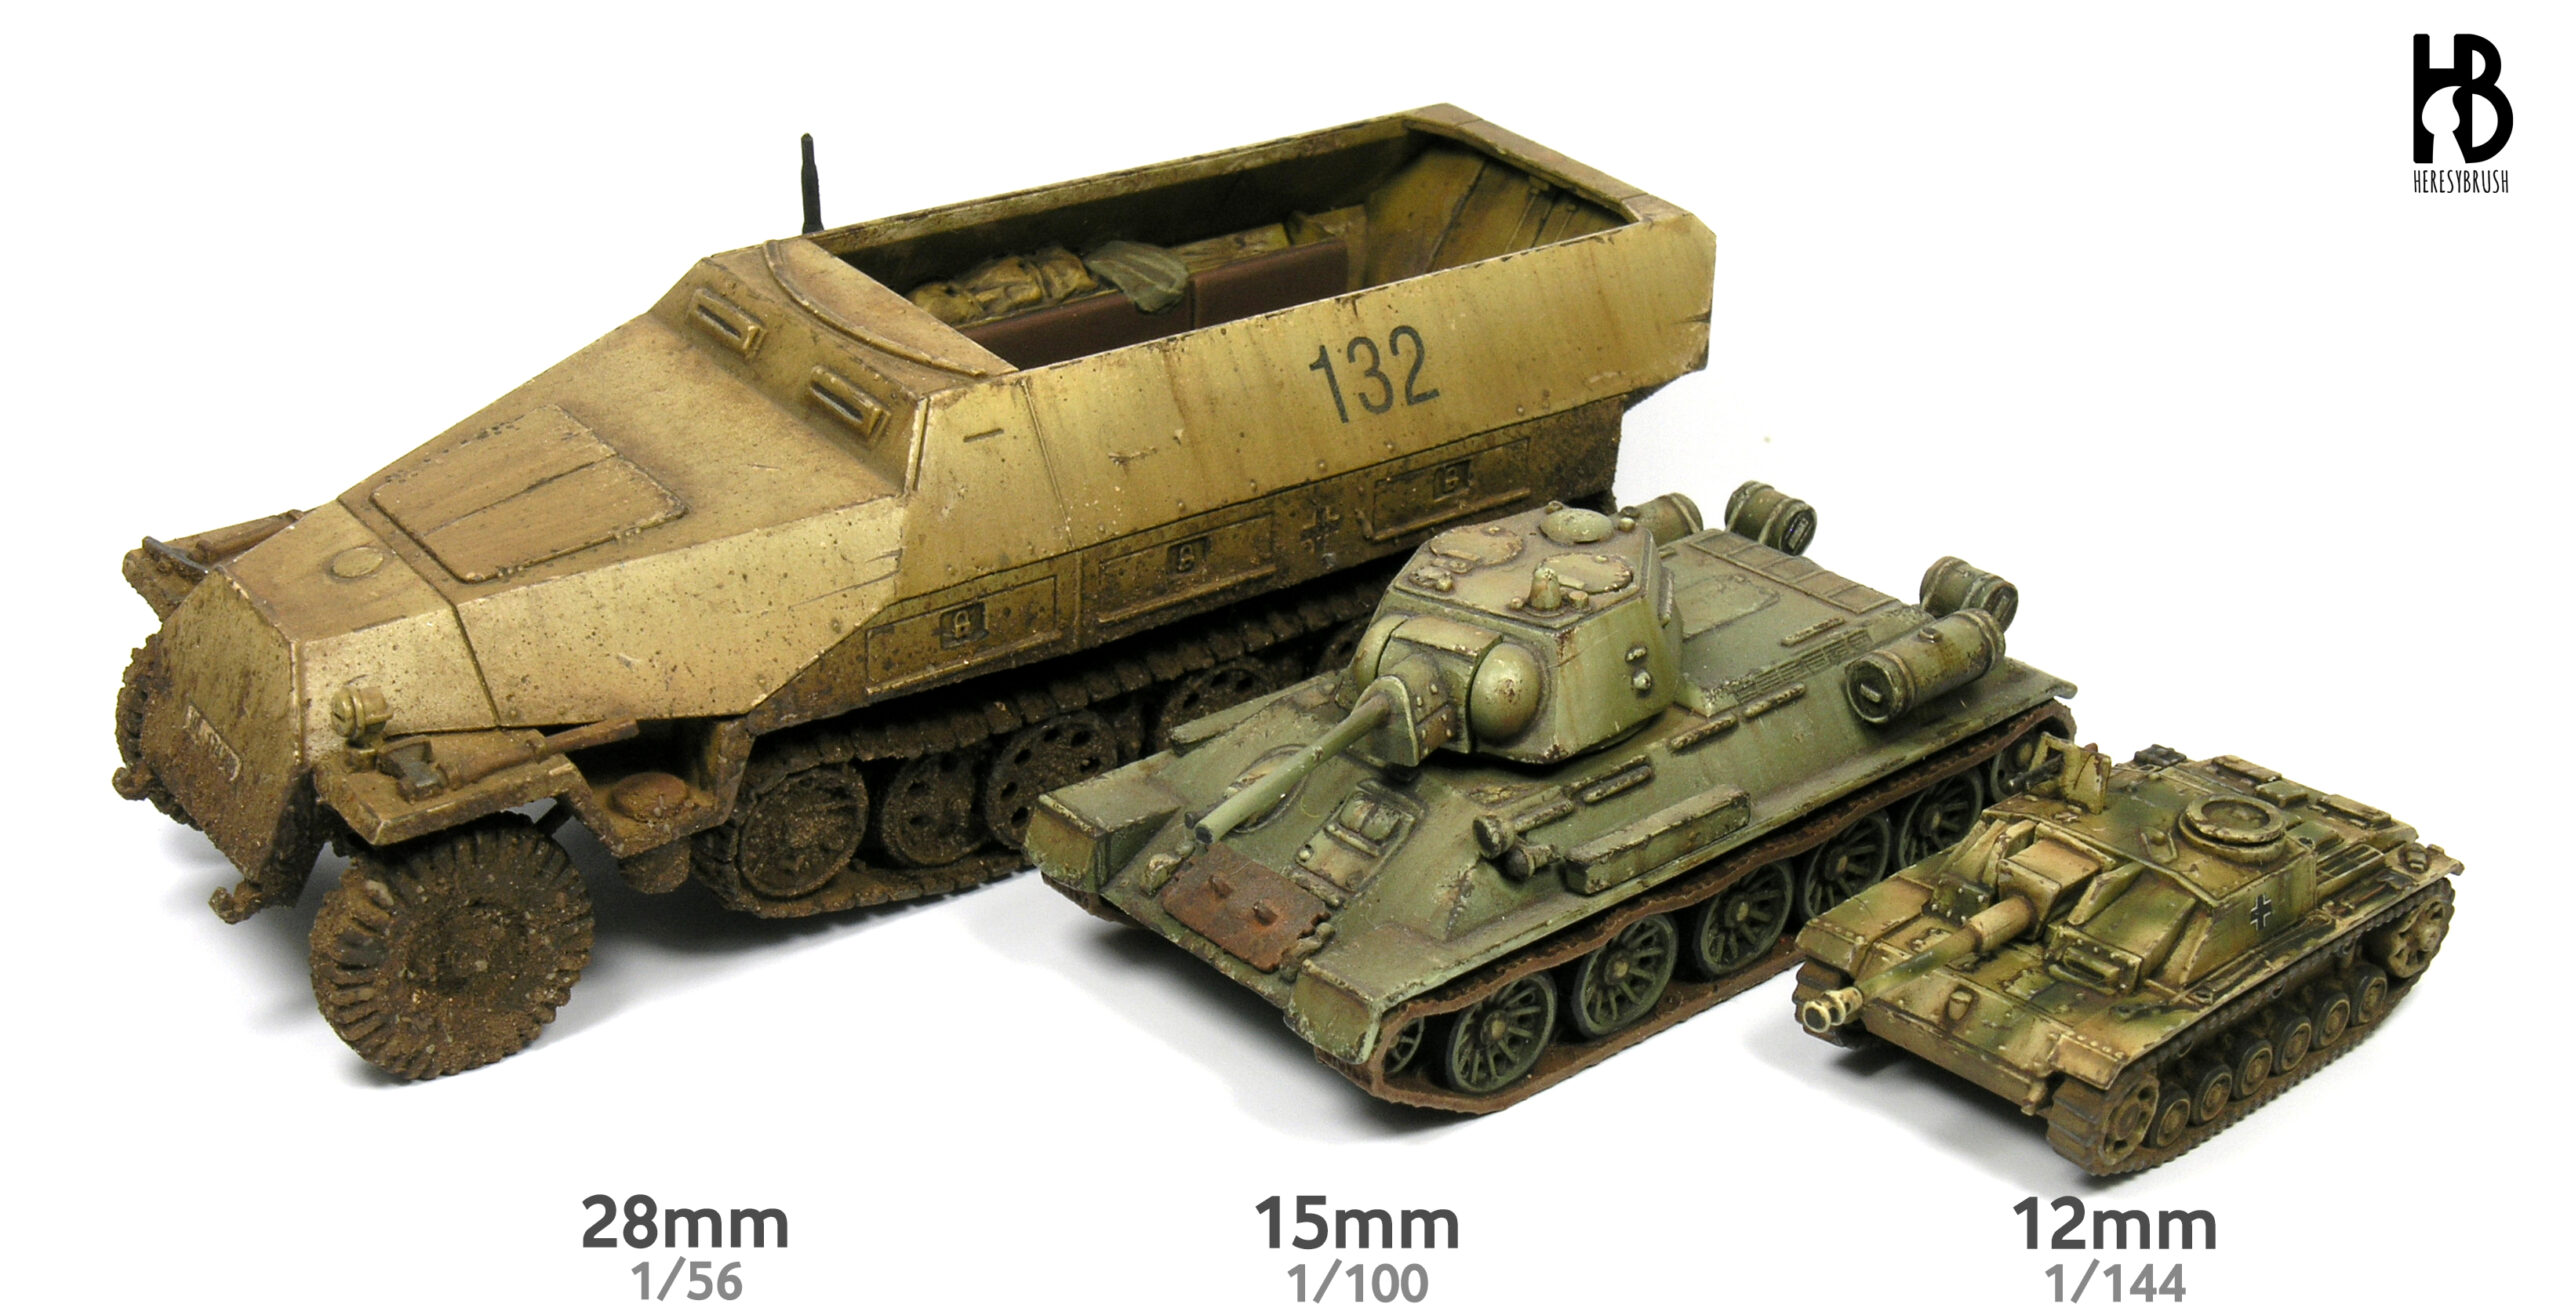 How to paint 12mm (1:144) WWII tanks – HeresyBrush